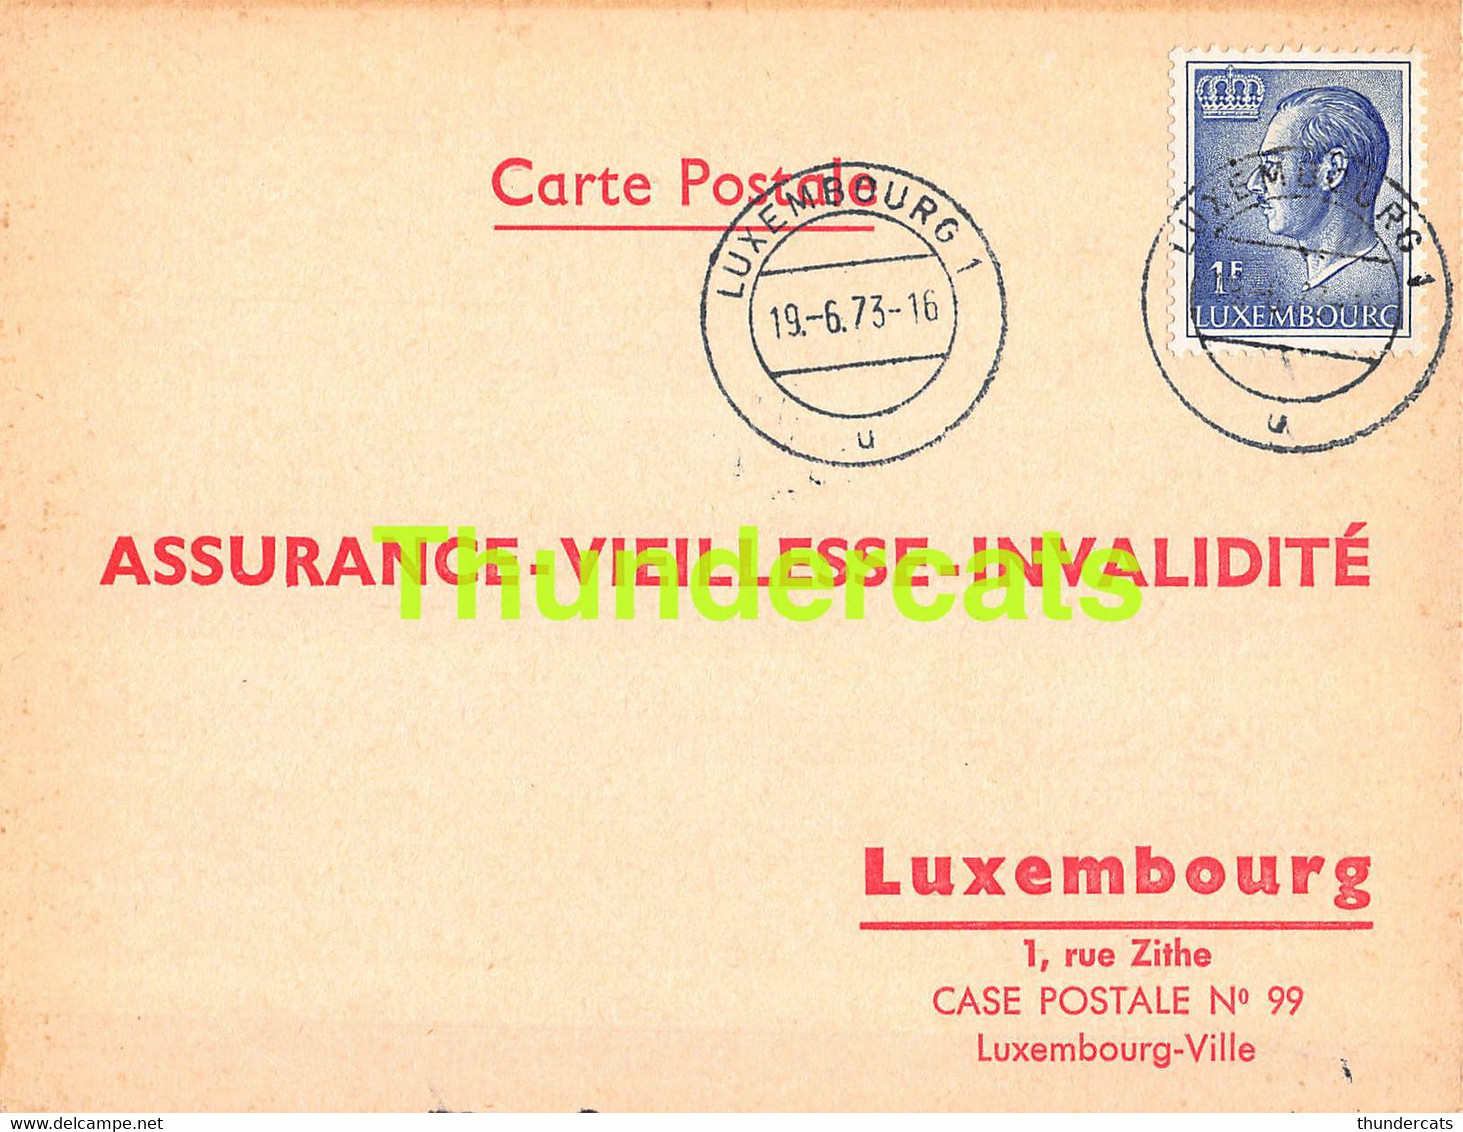 ASSURANCE VIEILLESSE INVALIDITE LUXEMBOURG 1973 ROLLINGER THEVES - Lettres & Documents